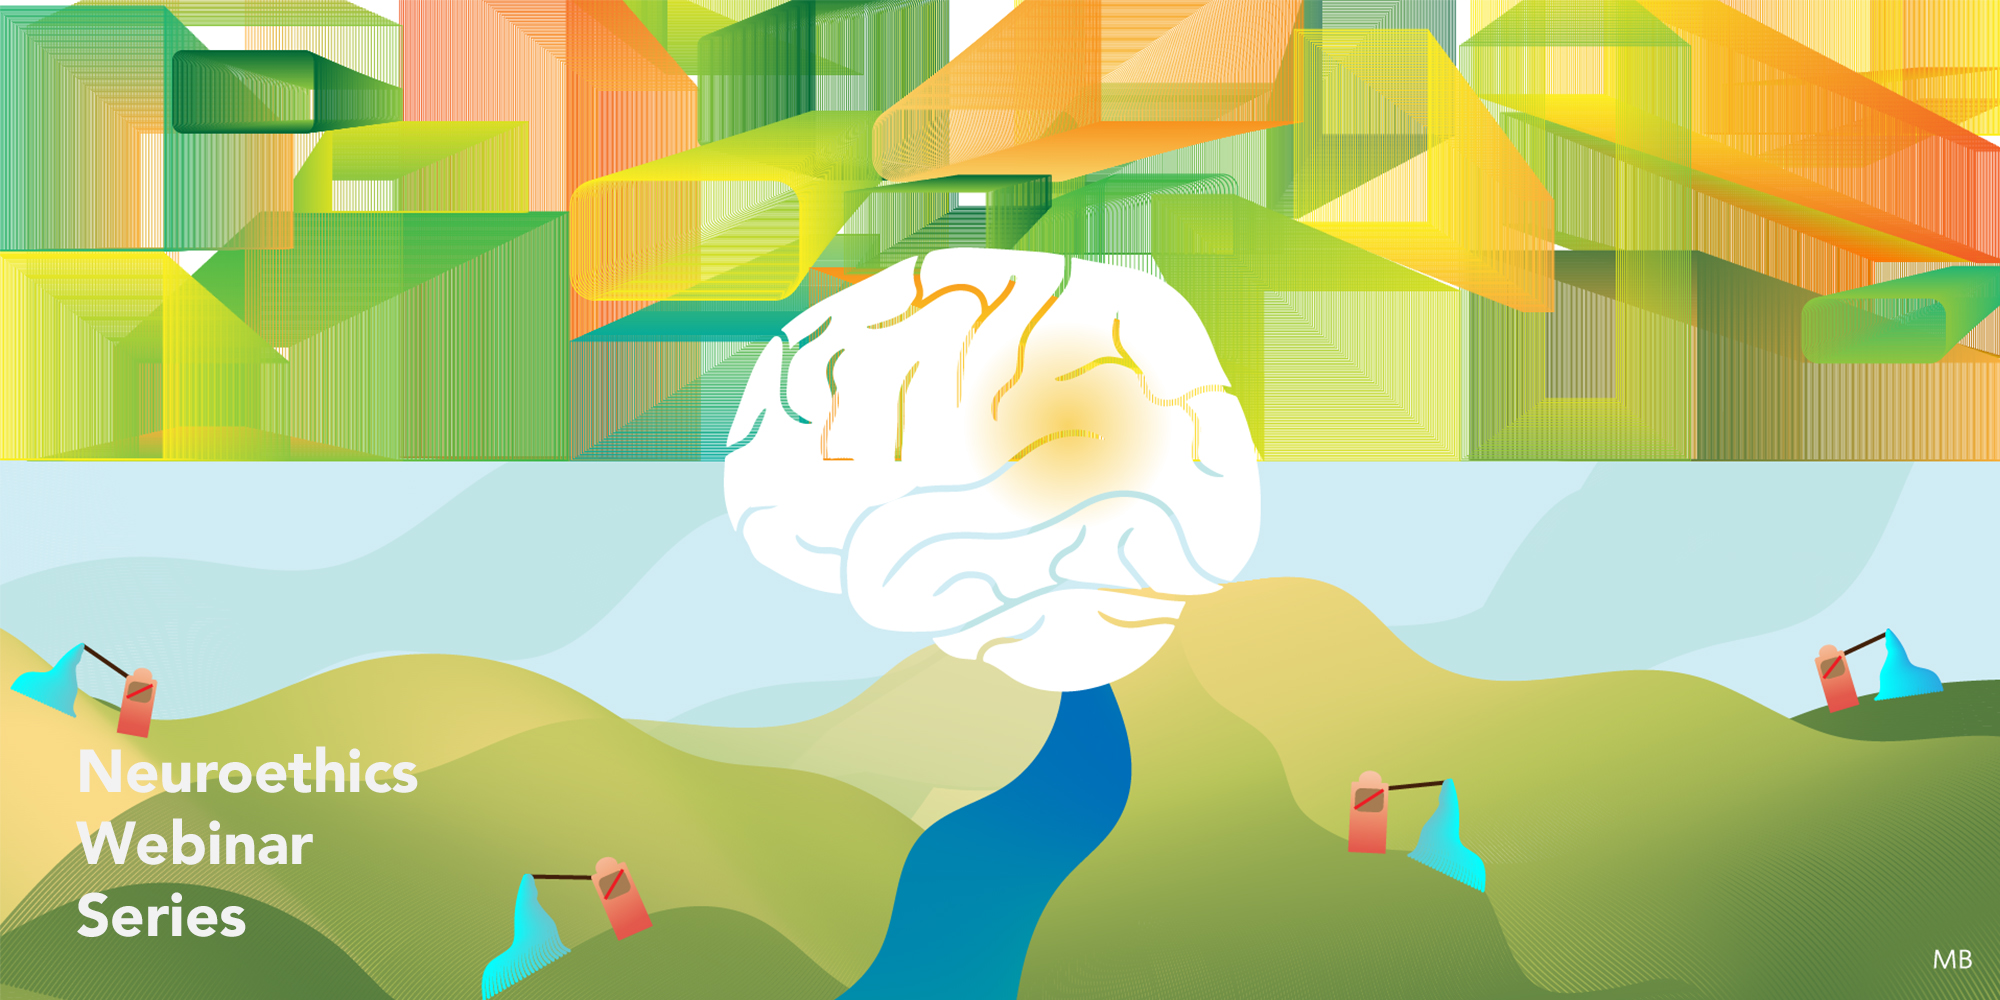 Neuroethics Webinar Series; Graphic image of field and hills with overlay brain; Designed by Marianne Bacani;